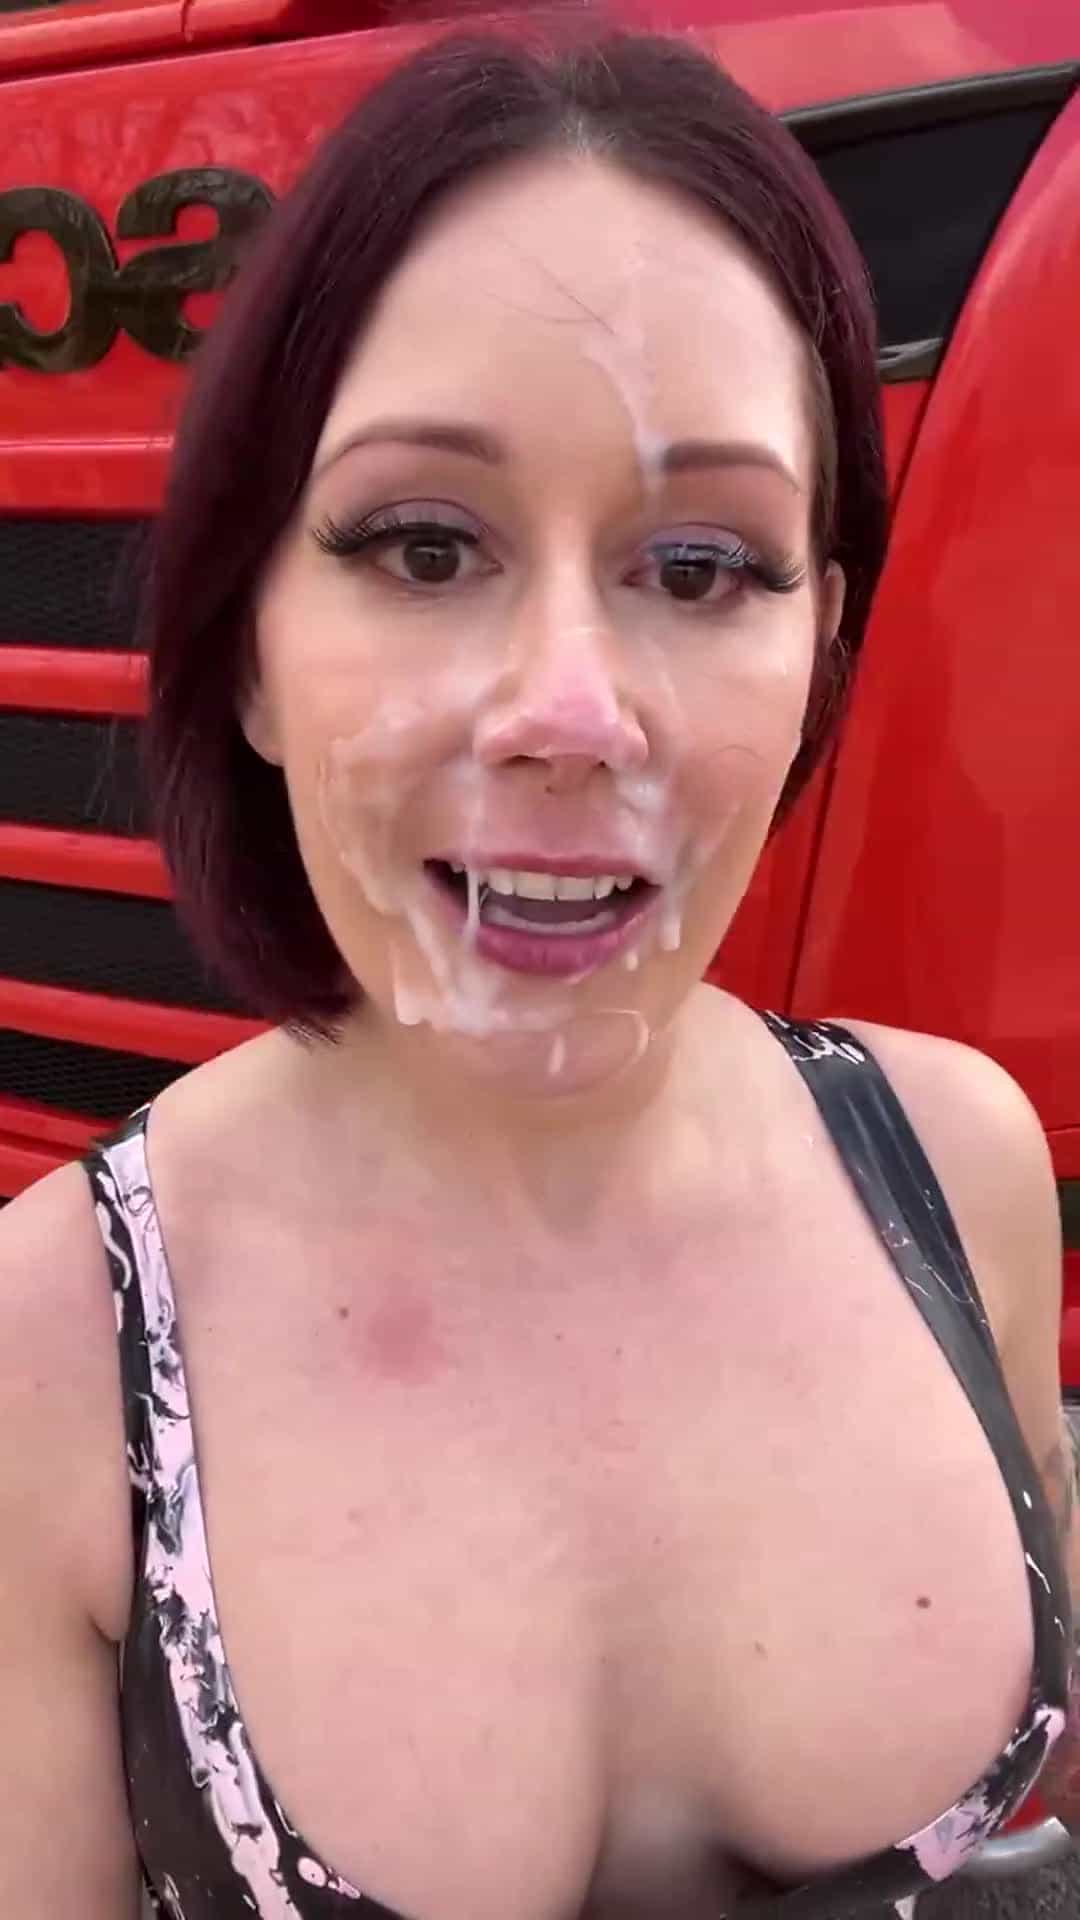 Truckers love hotwifes and I love their cum